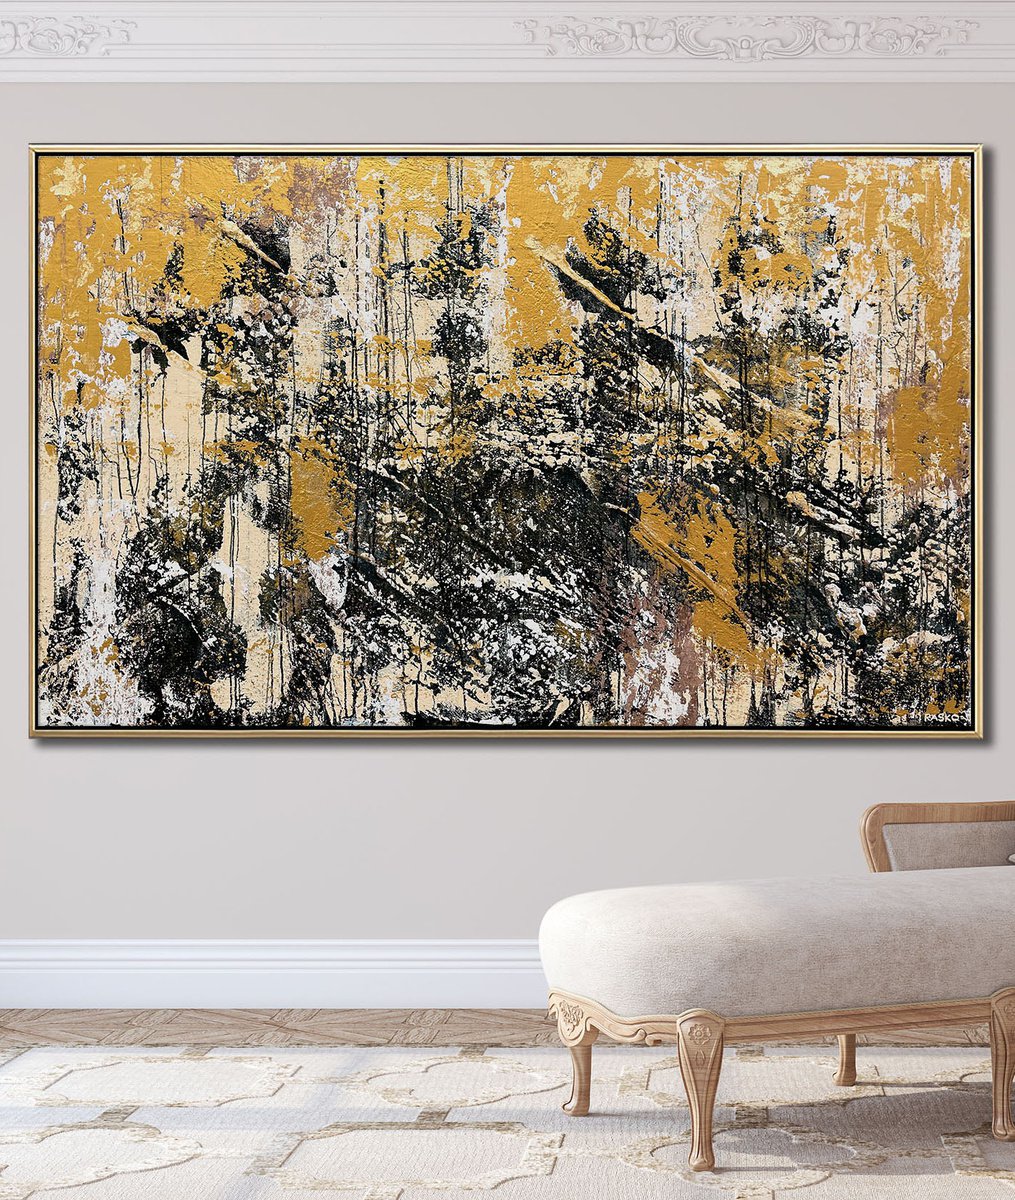 ARMAGEDON - 180cm x 110cm - LARGE ABSTRACT PAINTING by Rasko